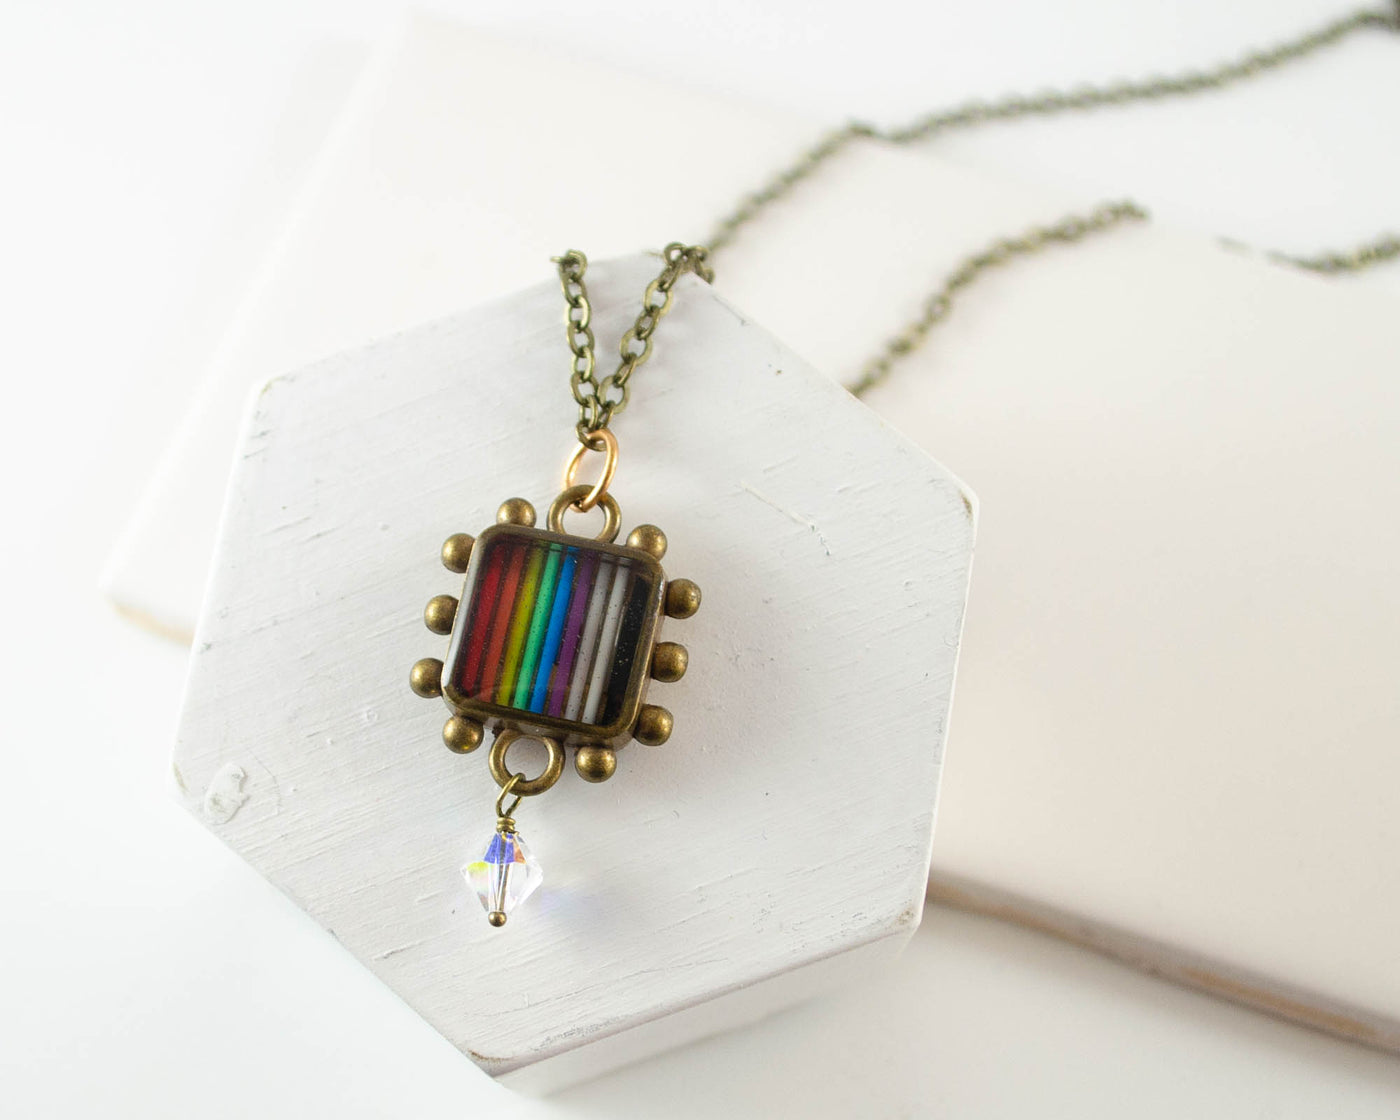 handmade necklace made from upcycled electronic parts and set in resin